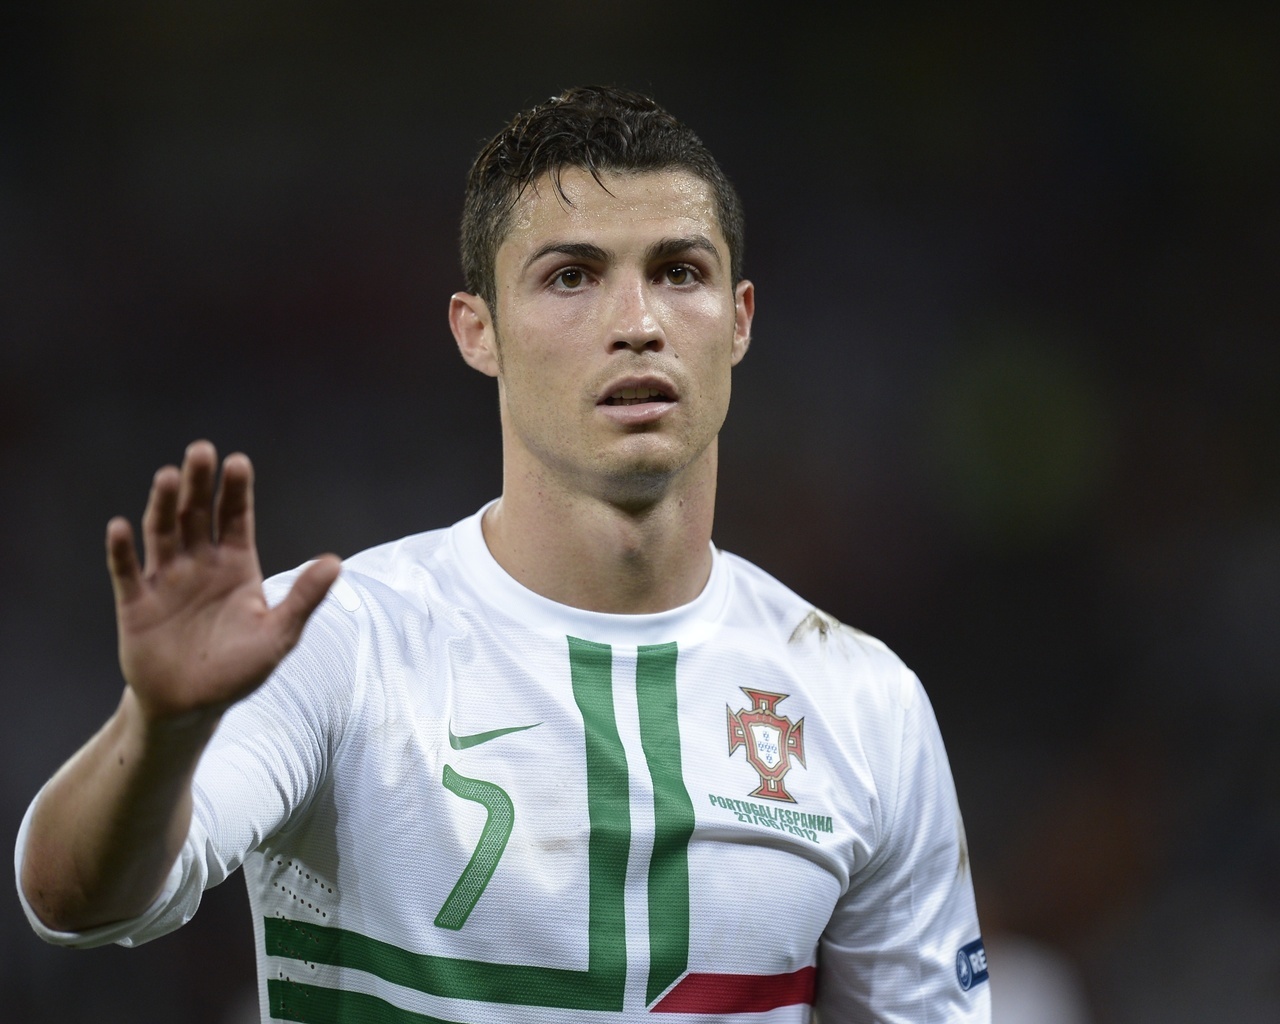 22063 download wallpaper sports, people, football, cristiano ronaldo screensavers and pictures for free